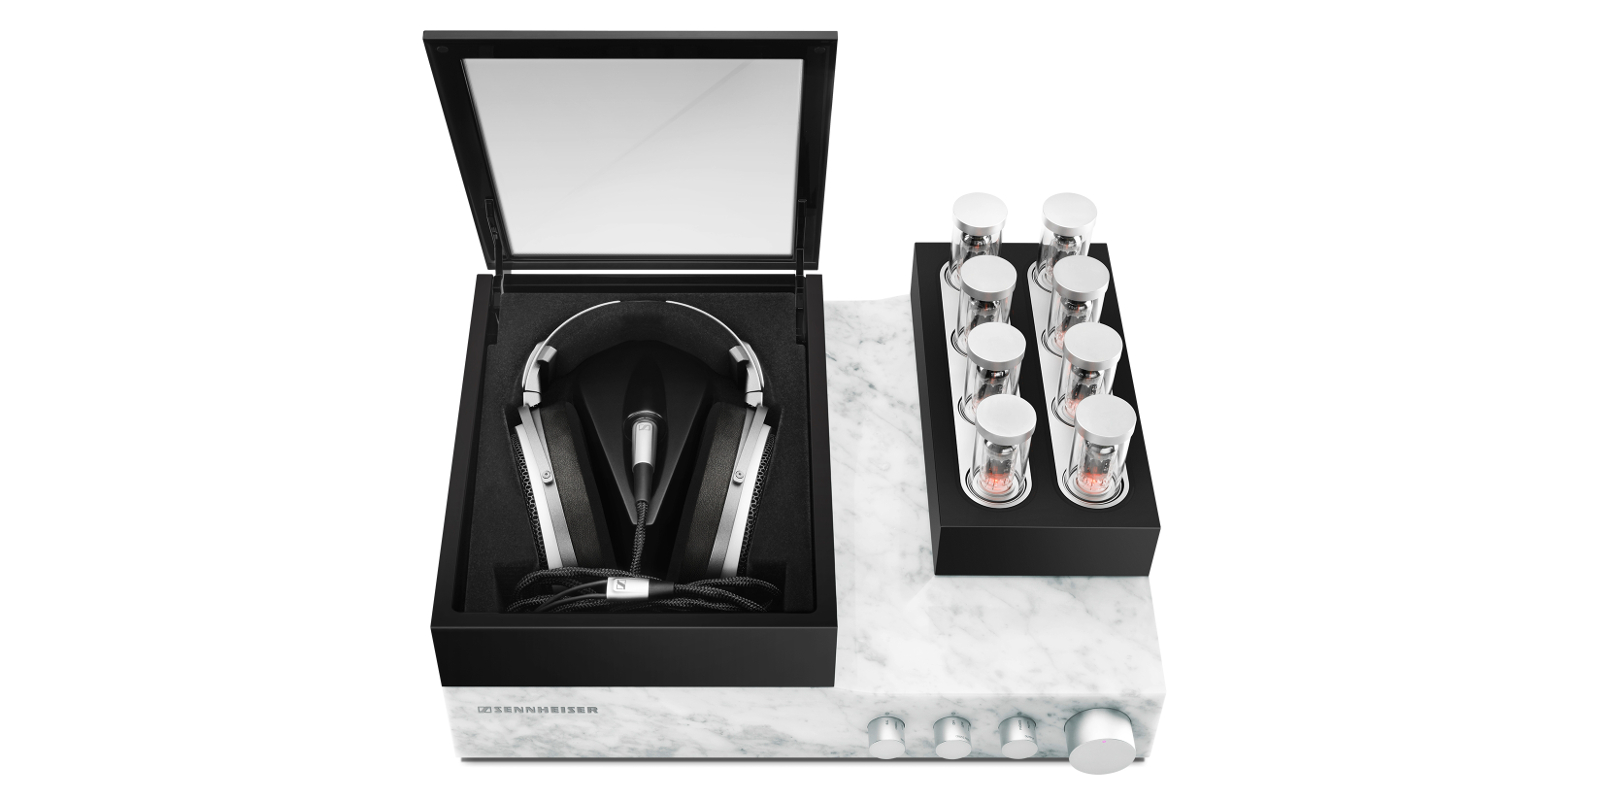 Sennheiser’s Built Probably The World’s Best Headphones — But They Cost $US55,000